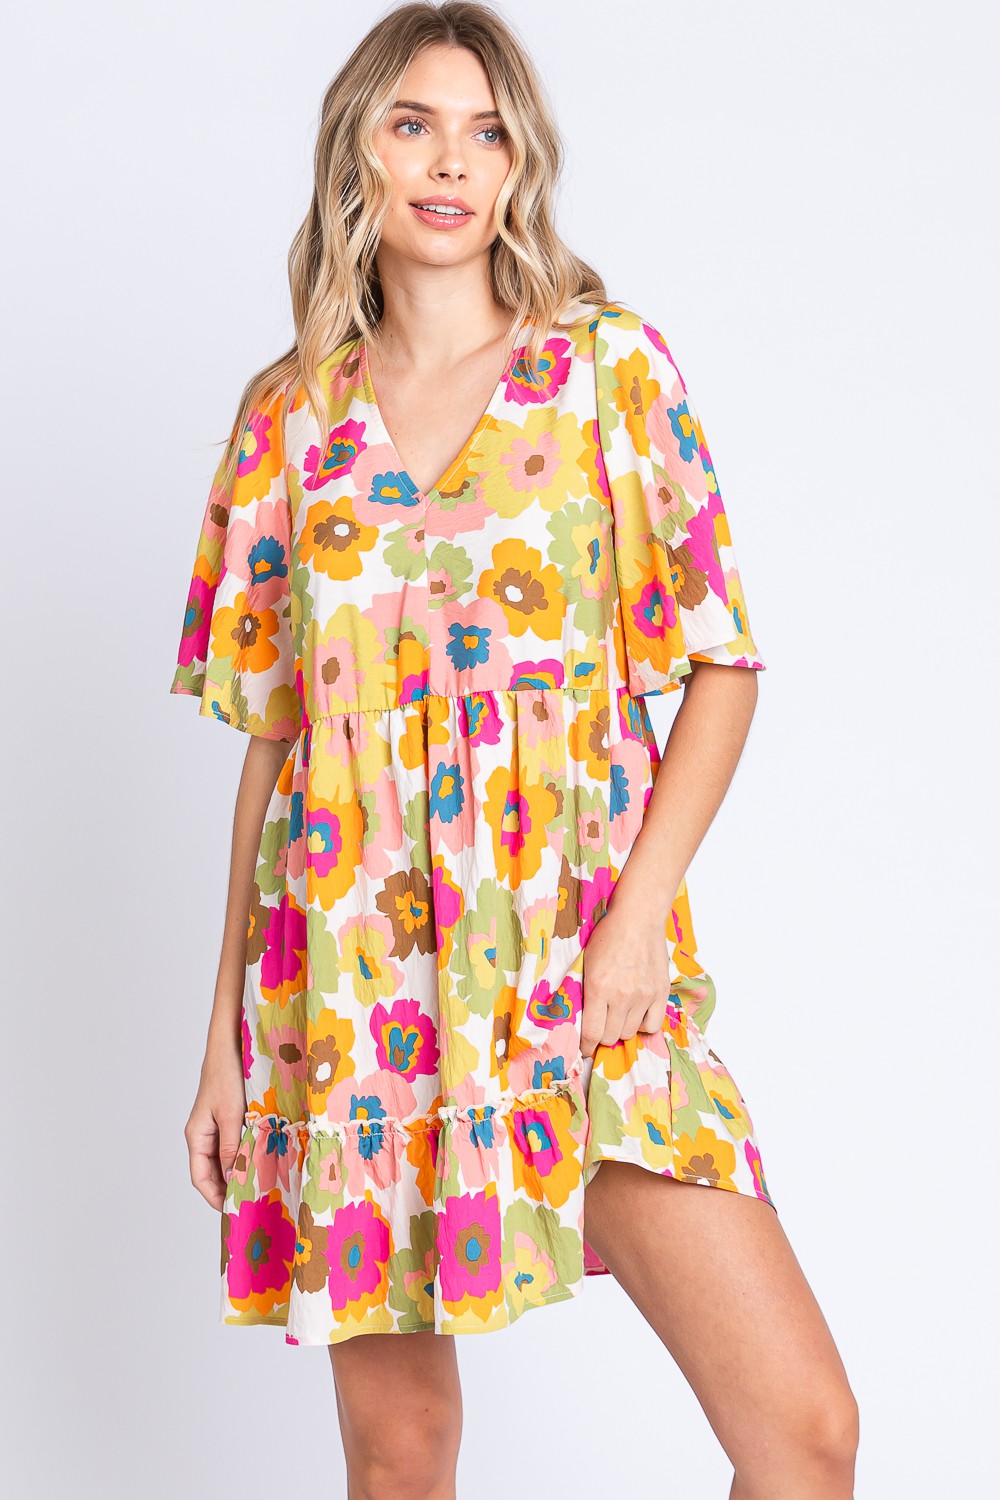 Here Comes the Sun Floral Mini Dress - Cheeky Chic Boutique